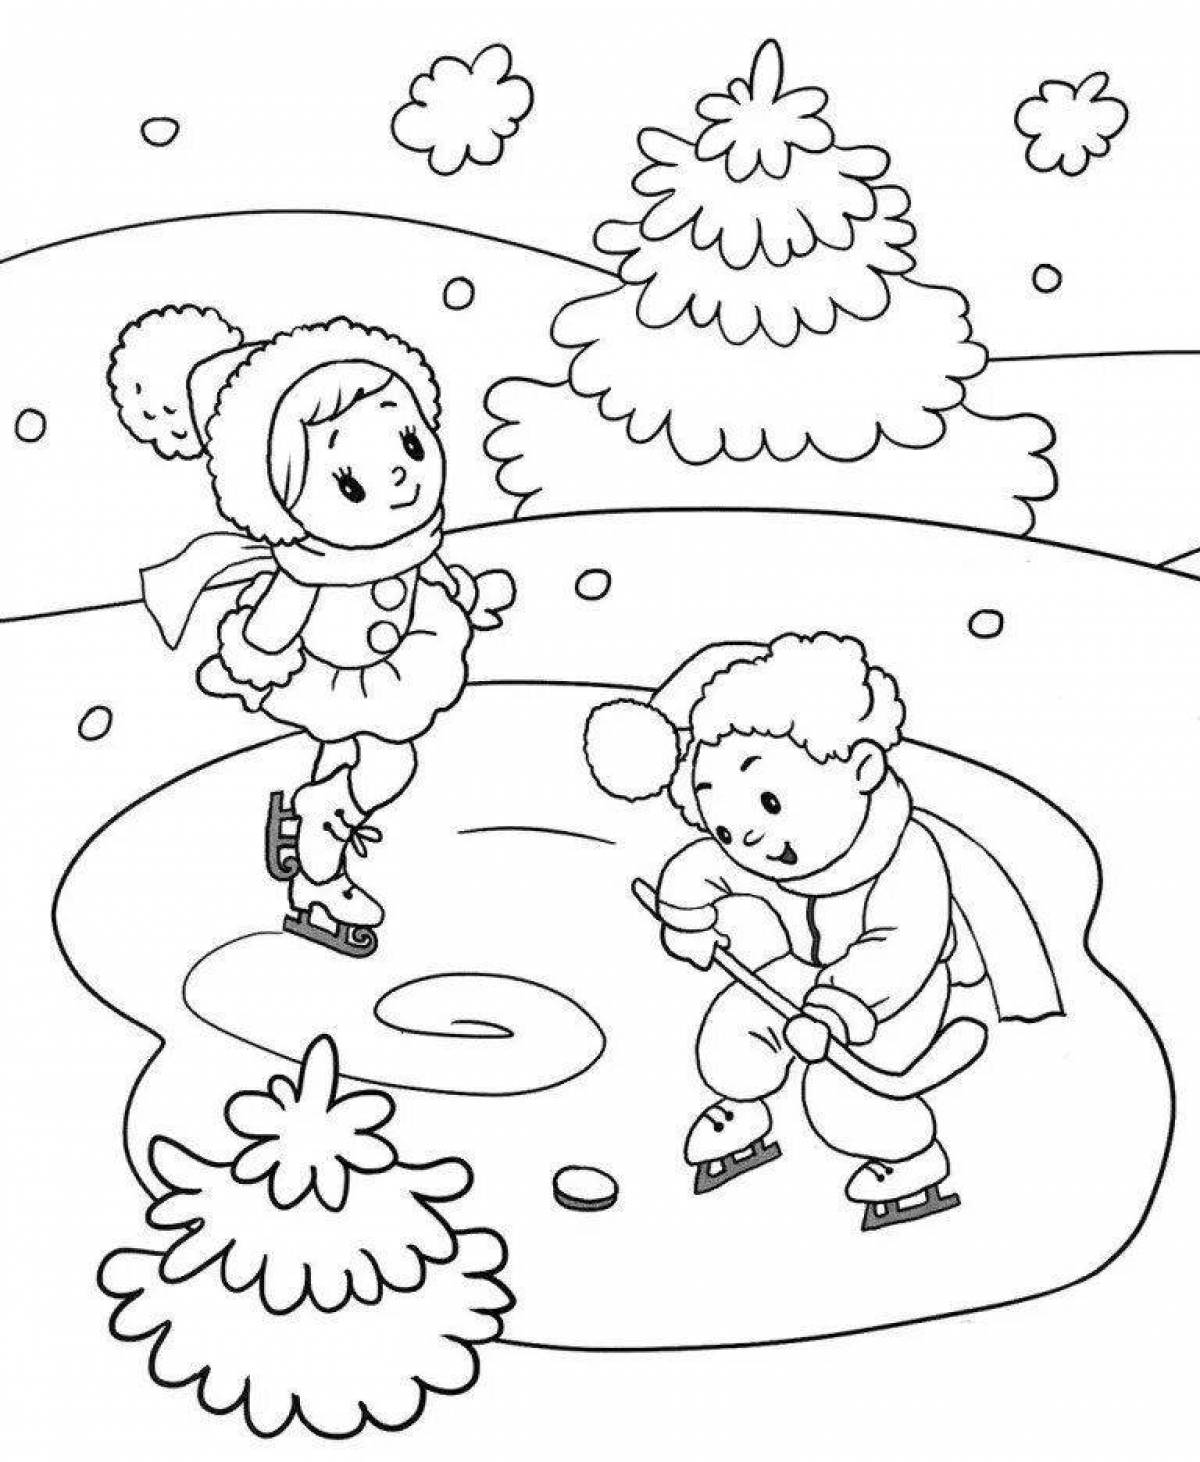 Joyful winter coloring for children 5 years old